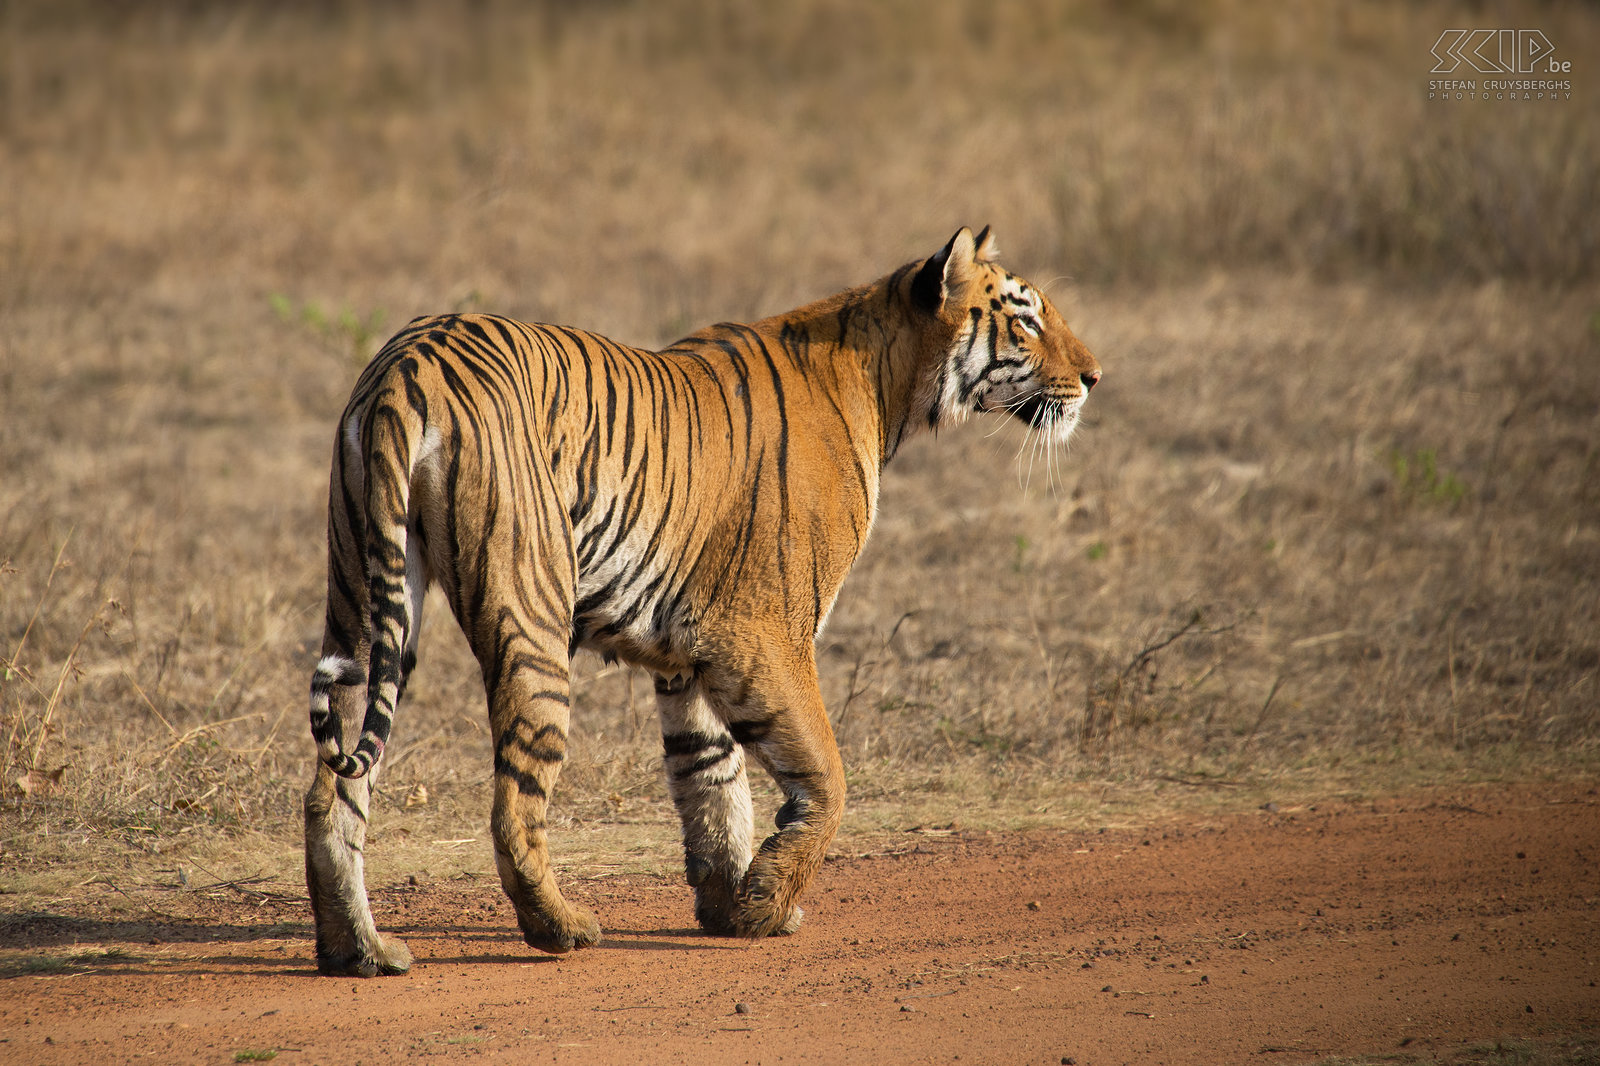 Tadoba - Tigress It was amazing and exciting to see these majestic animals in the wild. It is estimated that there are only around 1850 animals of the Bengal tiger in the wild. Stefan Cruysberghs